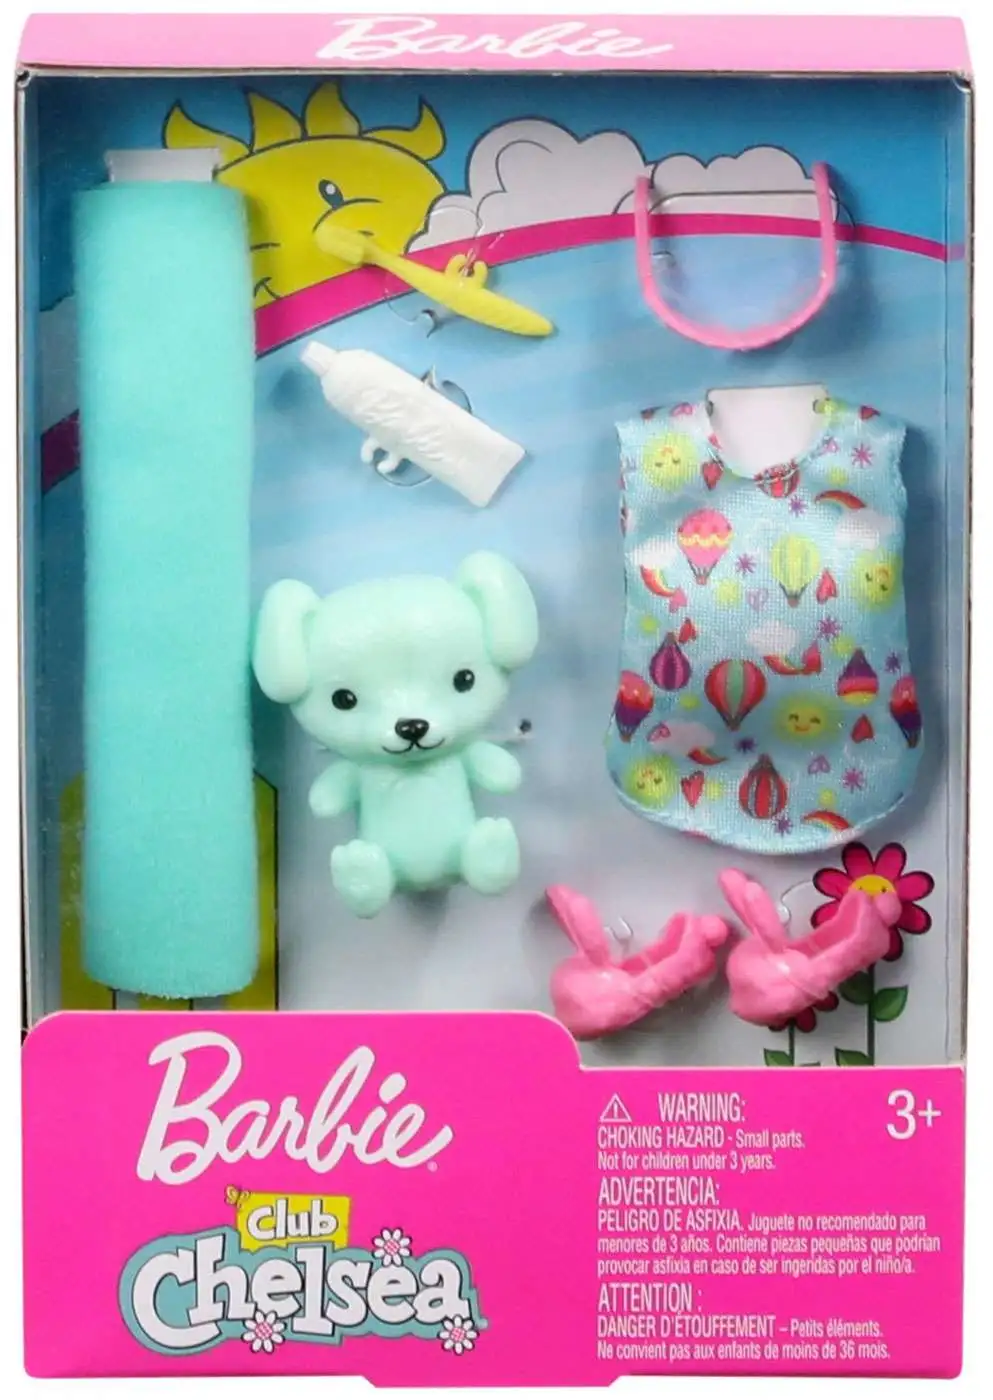 Barbie Club Chelsea Bedtime Accessory Pack Damaged Package Mattel Toys -  ToyWiz